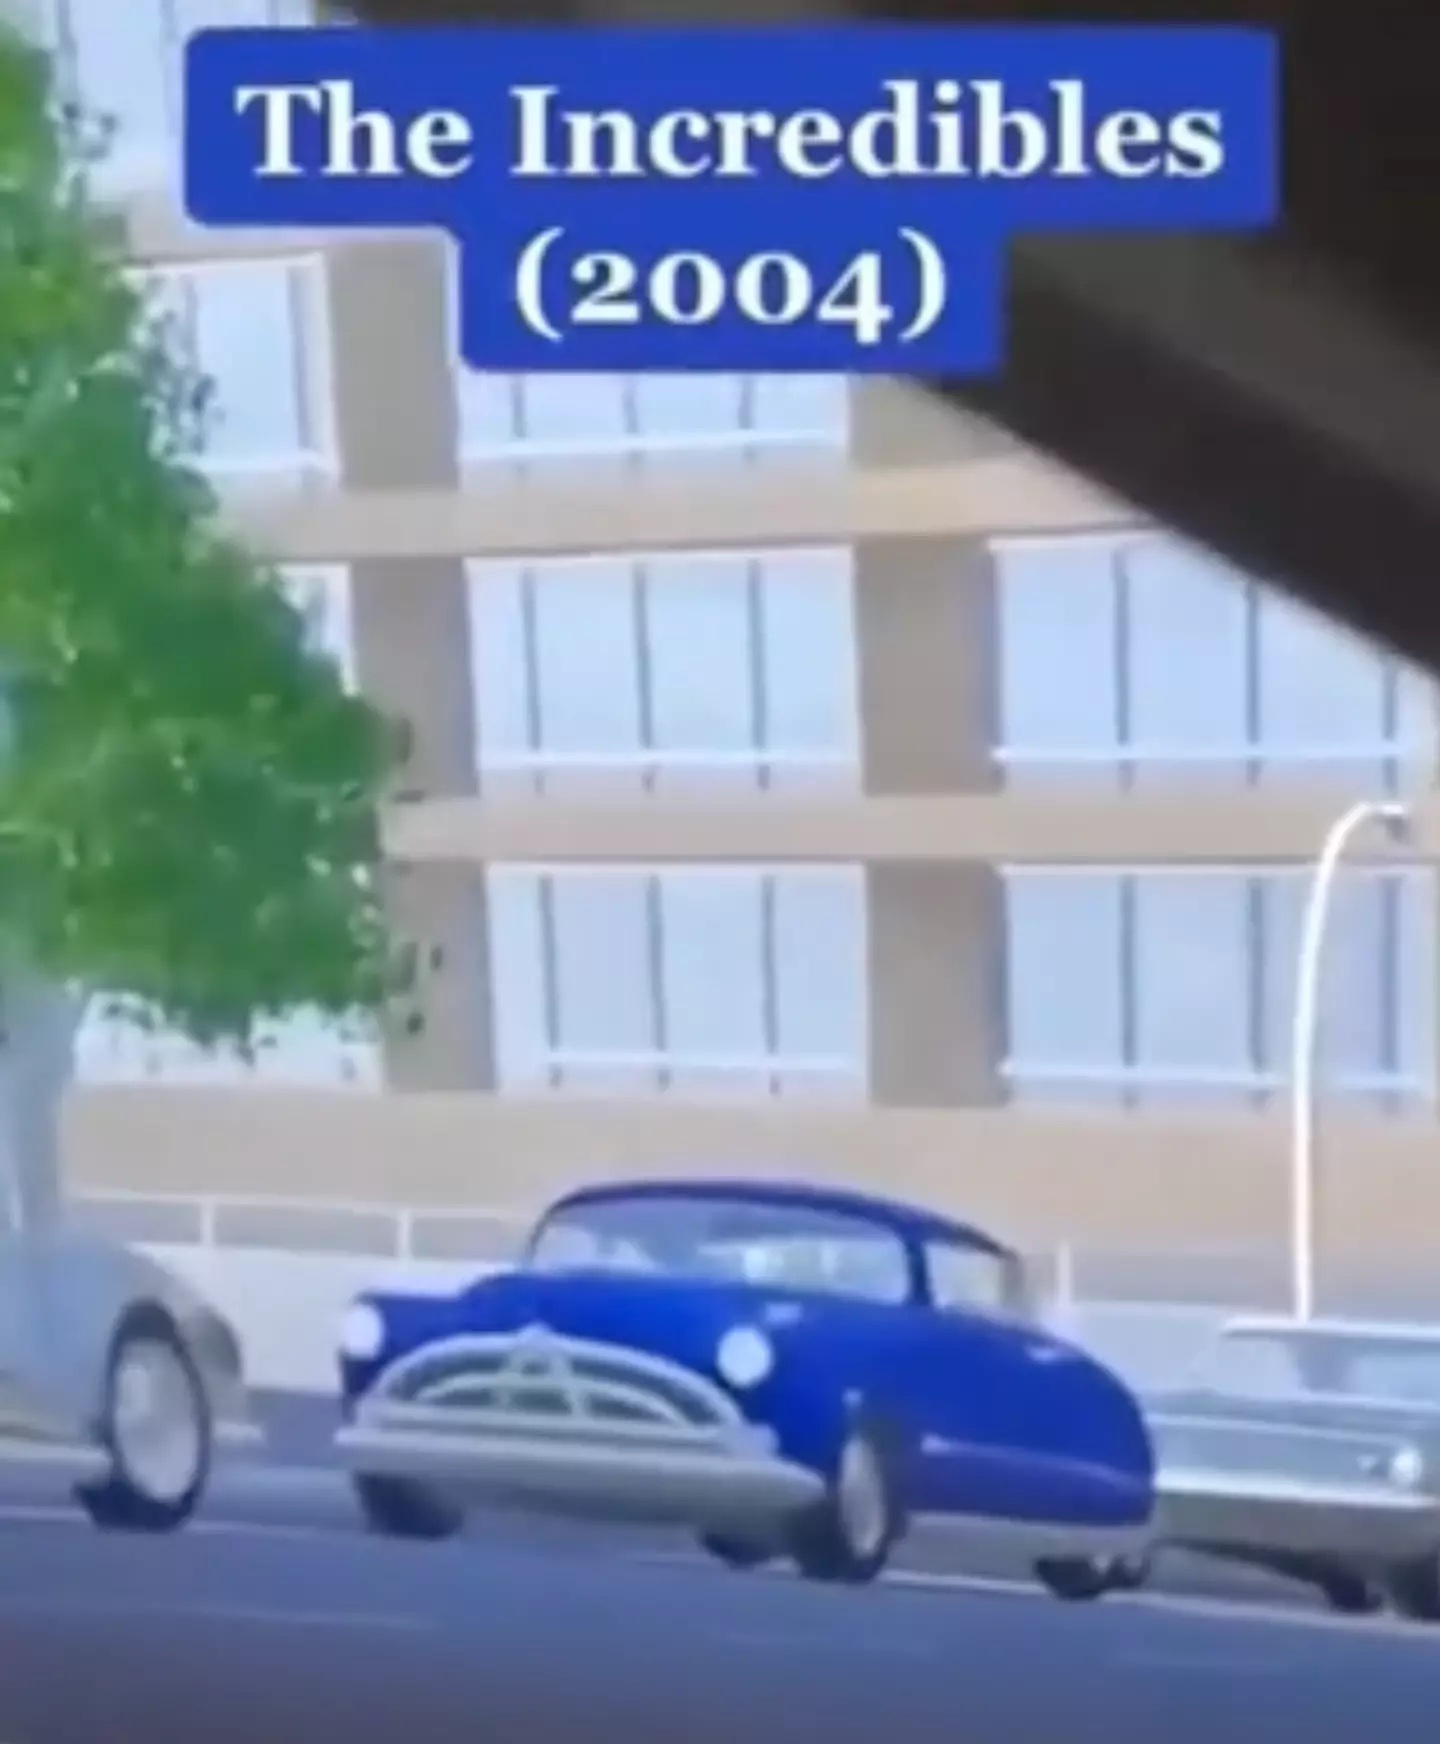 A Cars easter egg was spotted in The Incredibles.